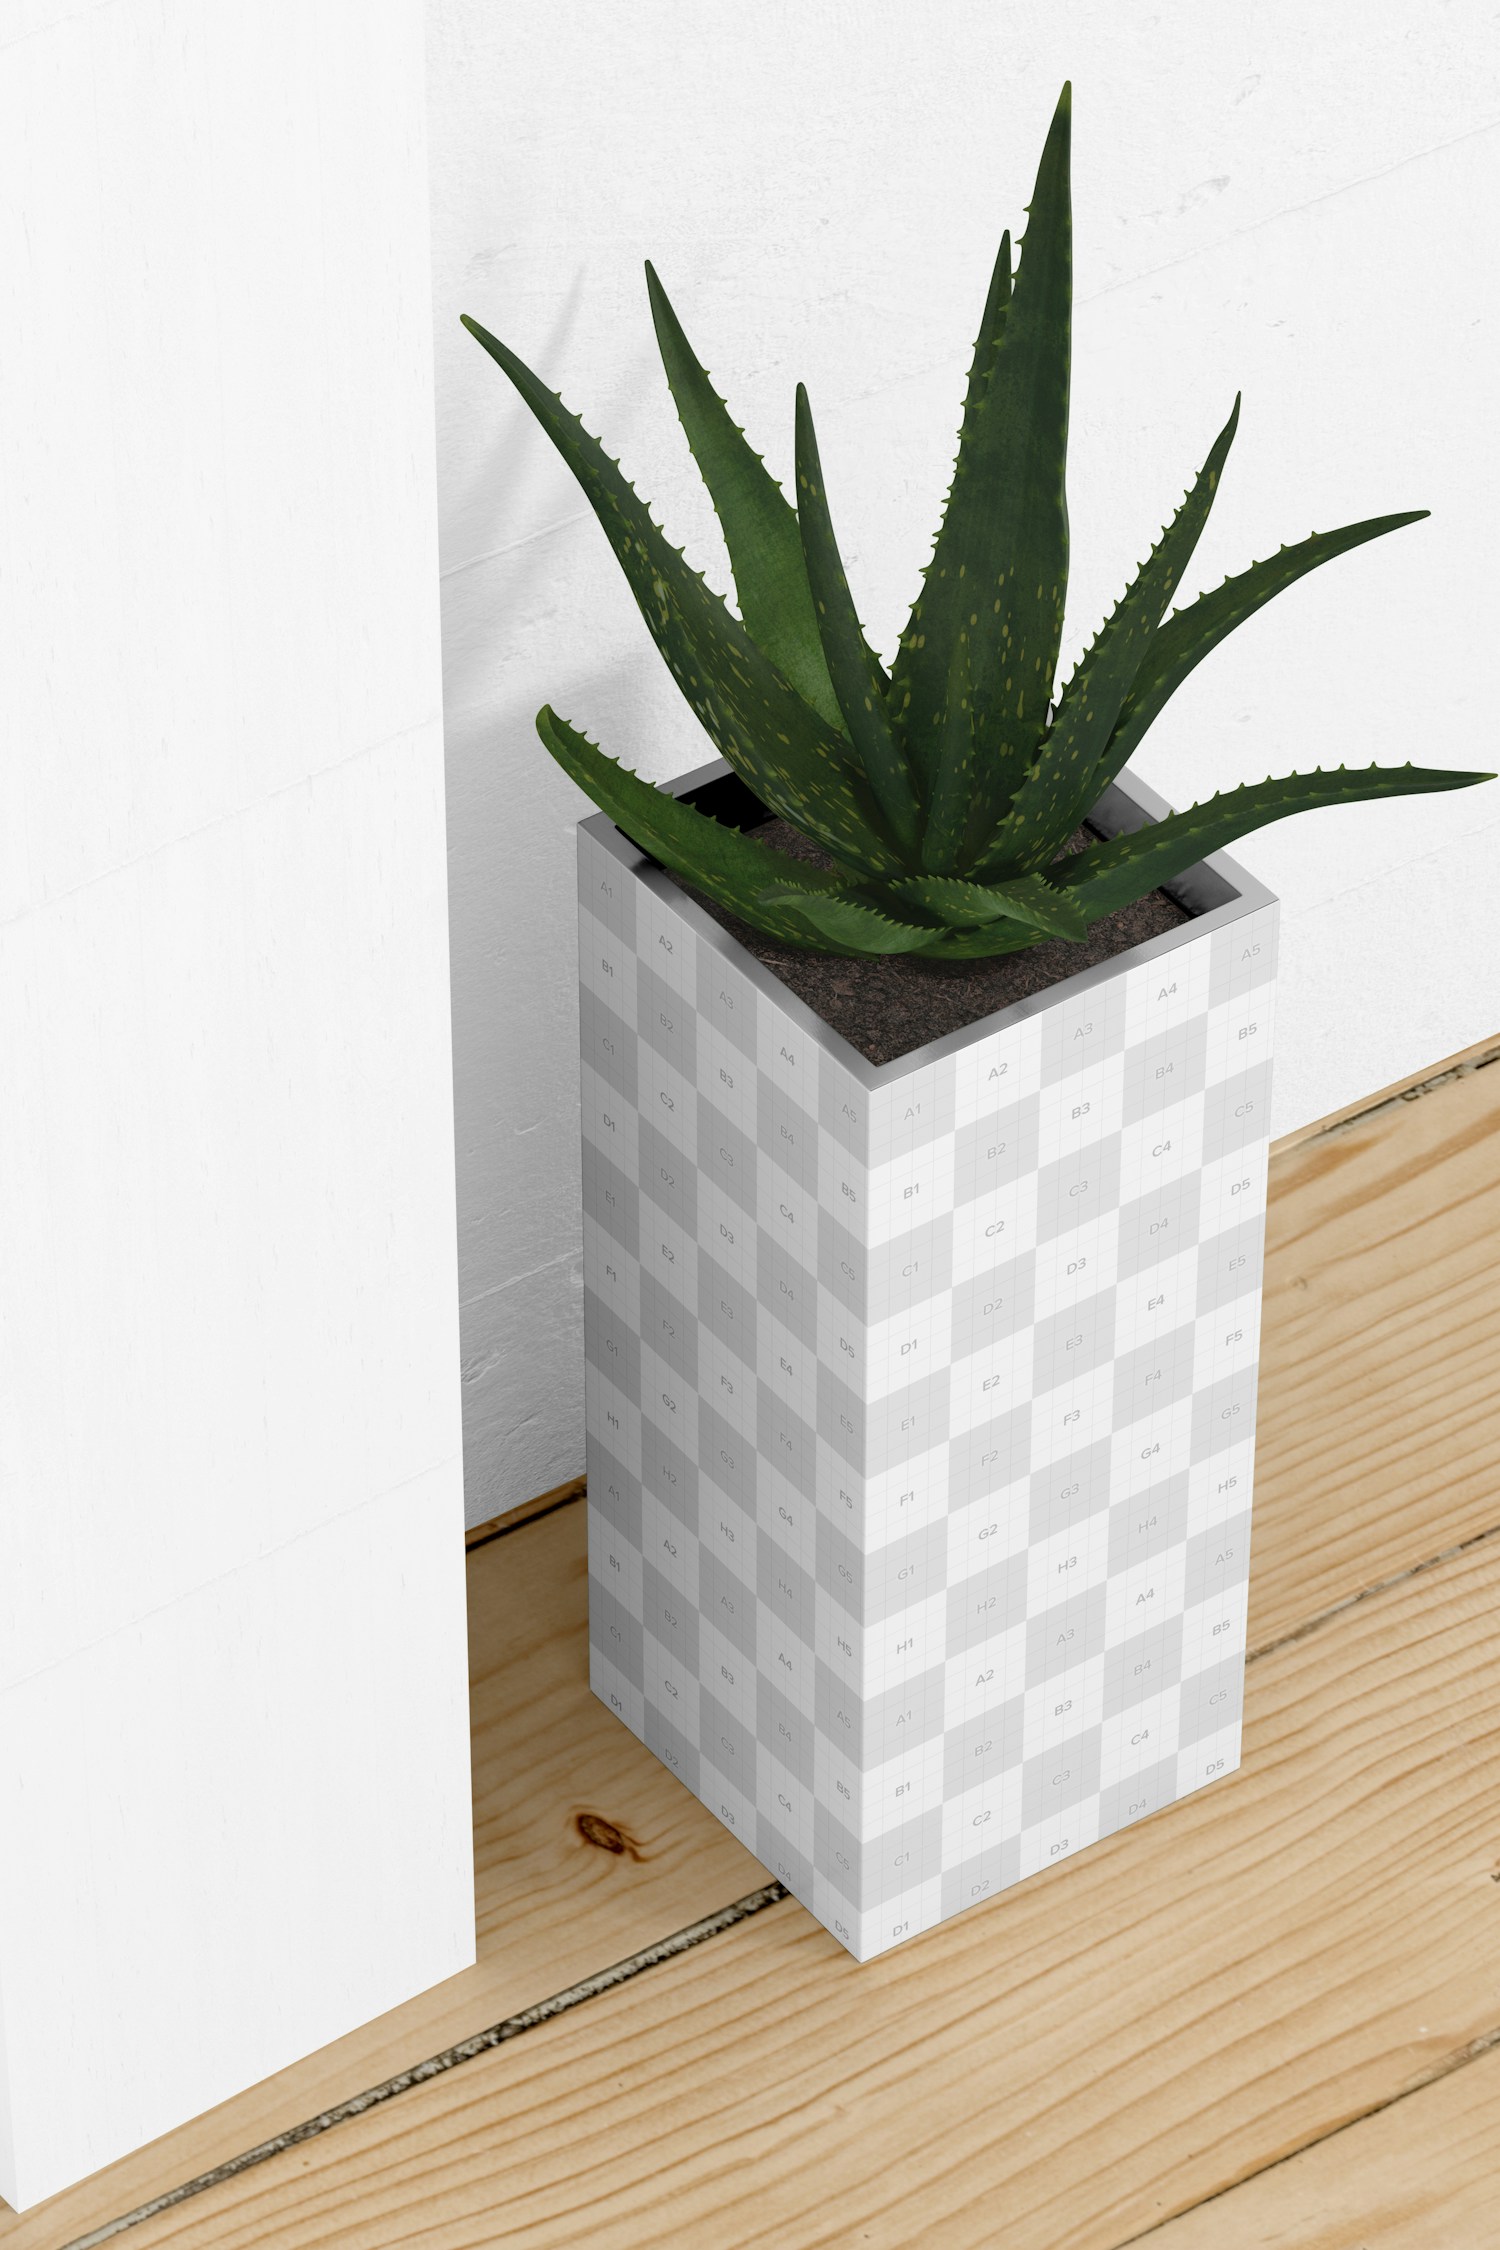 Steel Tall Planter Mockup, Perspective